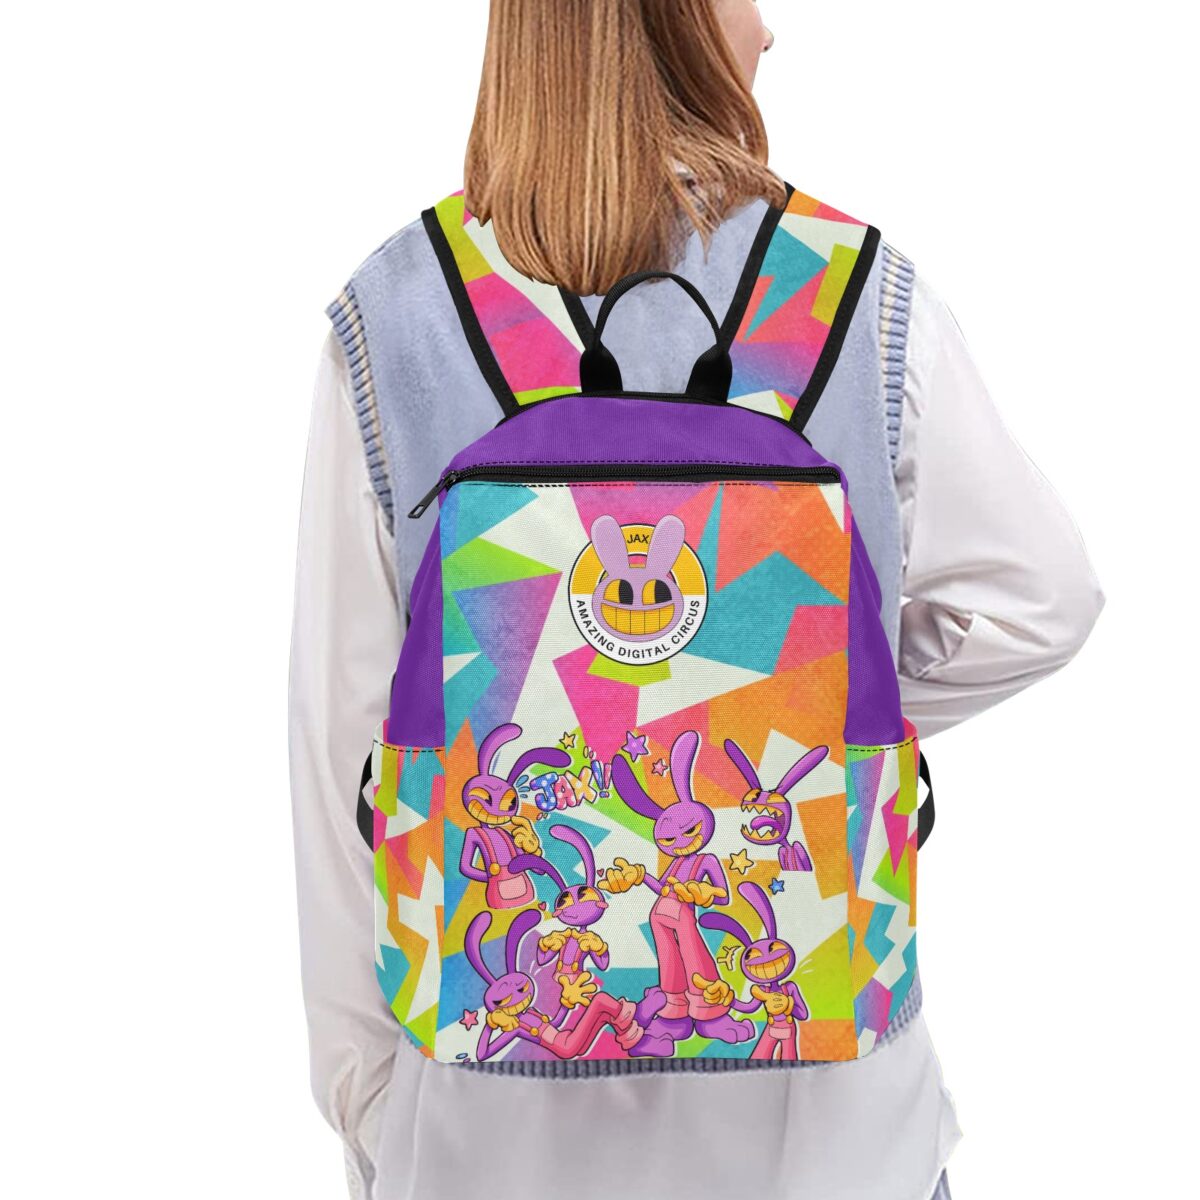 JAX Amazing Digital Circus Animated Series Character Backpack for School, Travel, Sports Book Bag Cool Kiddo 10